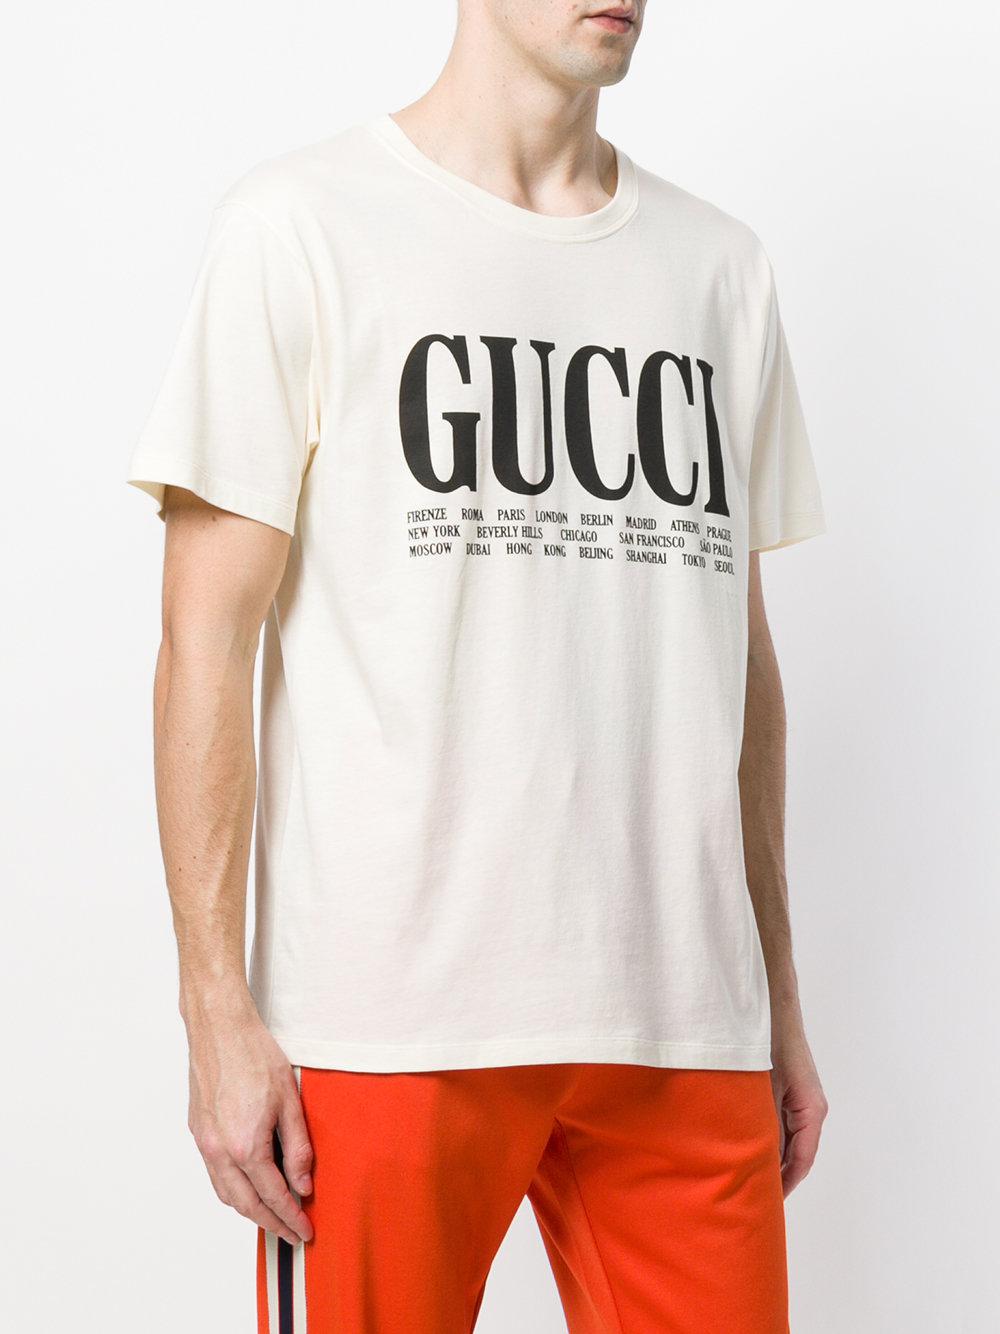 Gucci World Cities Print T-shirt in White for Men - Lyst